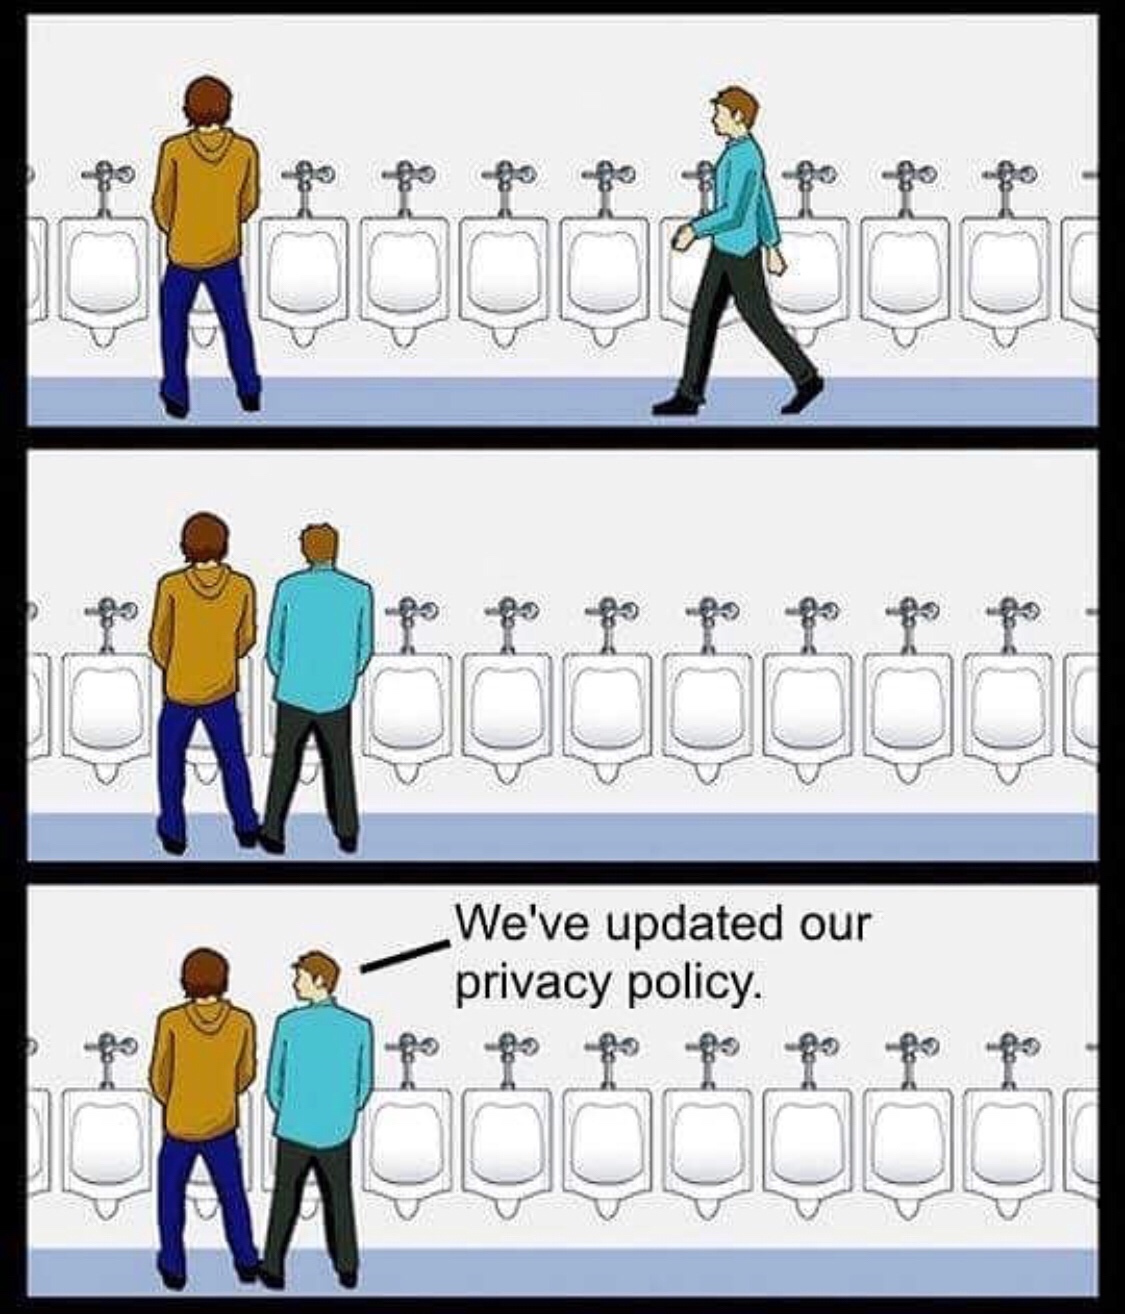 GDPR meme about changing their privacy policy of 2 men at a urinal